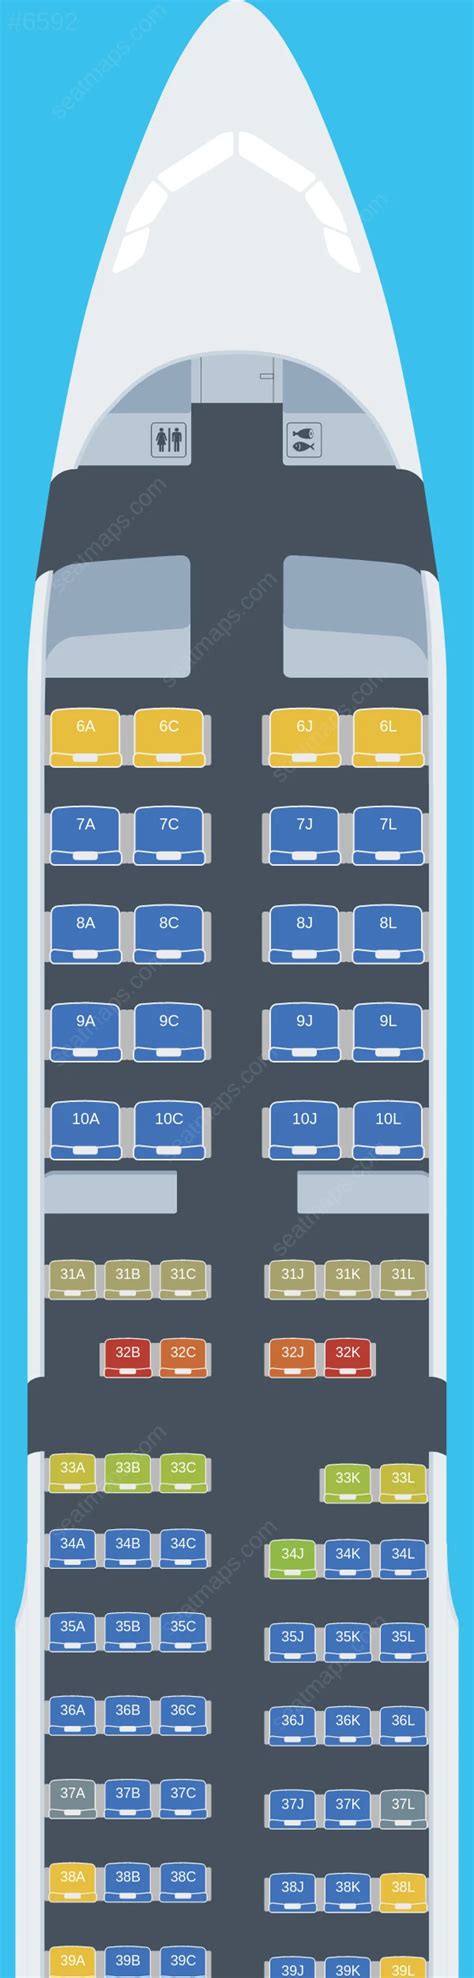 China Eastern Airlines Seat Map A321 Cabinets Matttroy